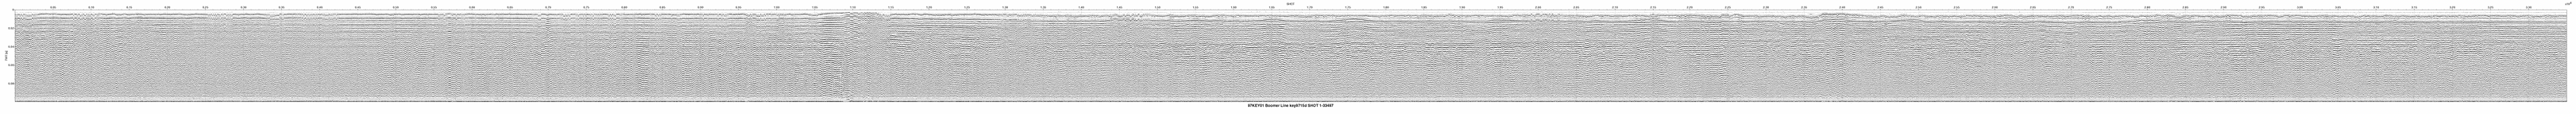 Thumbnail GIF image of the seismic trackline key9715d, with a hotlink to the more detailed, larger JPG image.